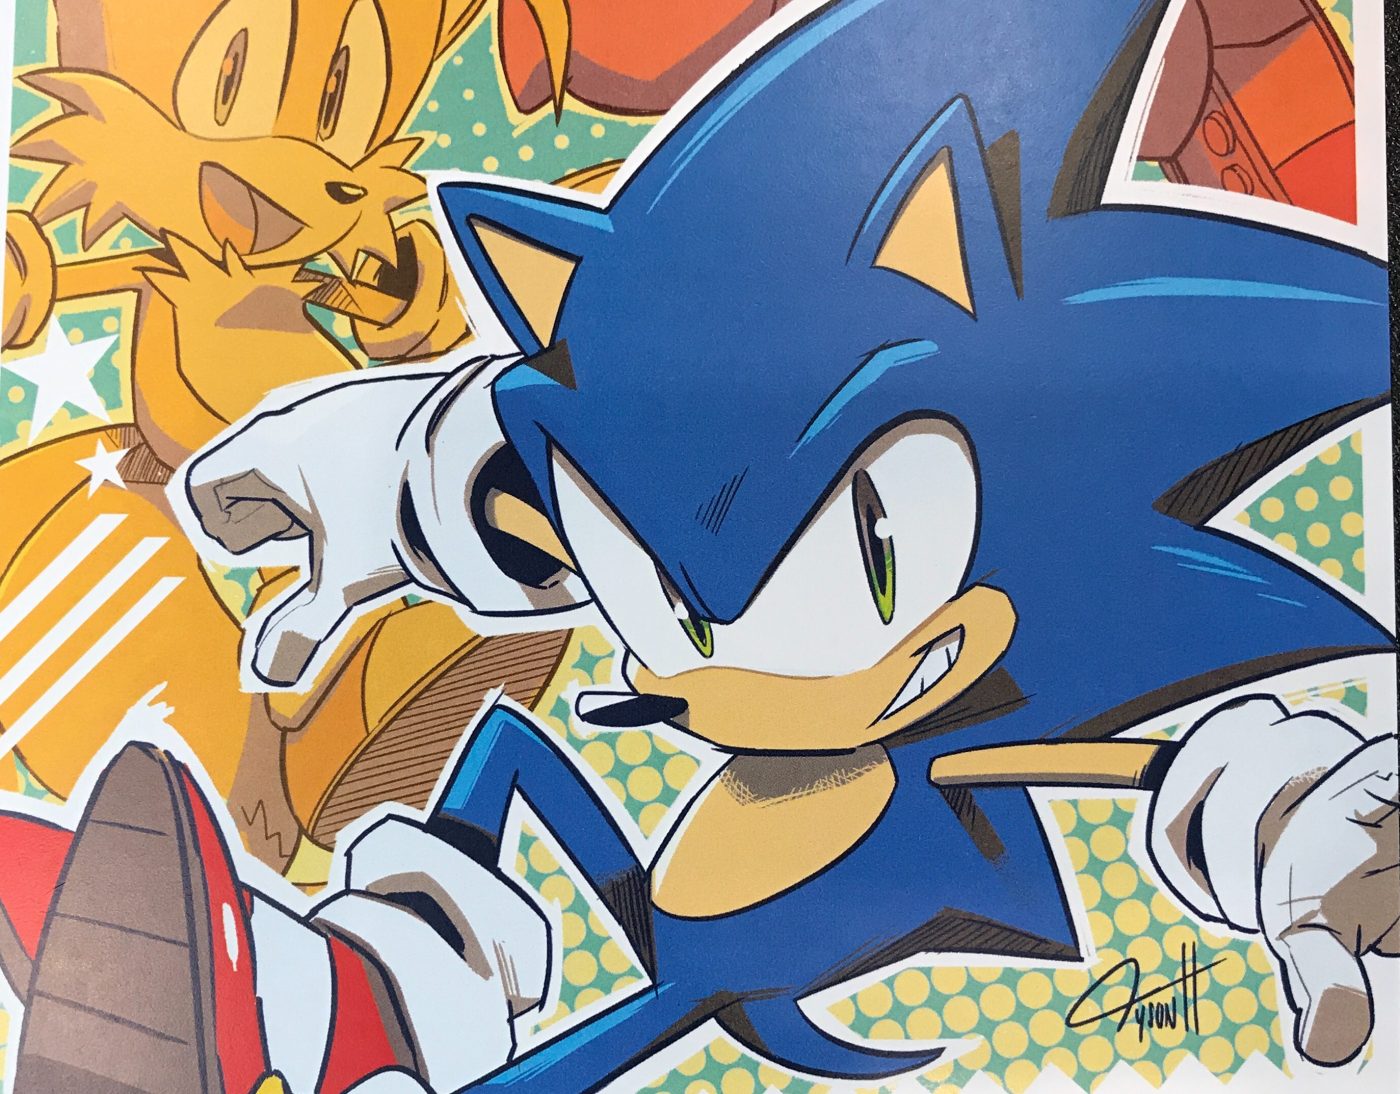 Ian Flynn and Tyson Hesse return for IDW's Sonic the Hedgehog in April 2018